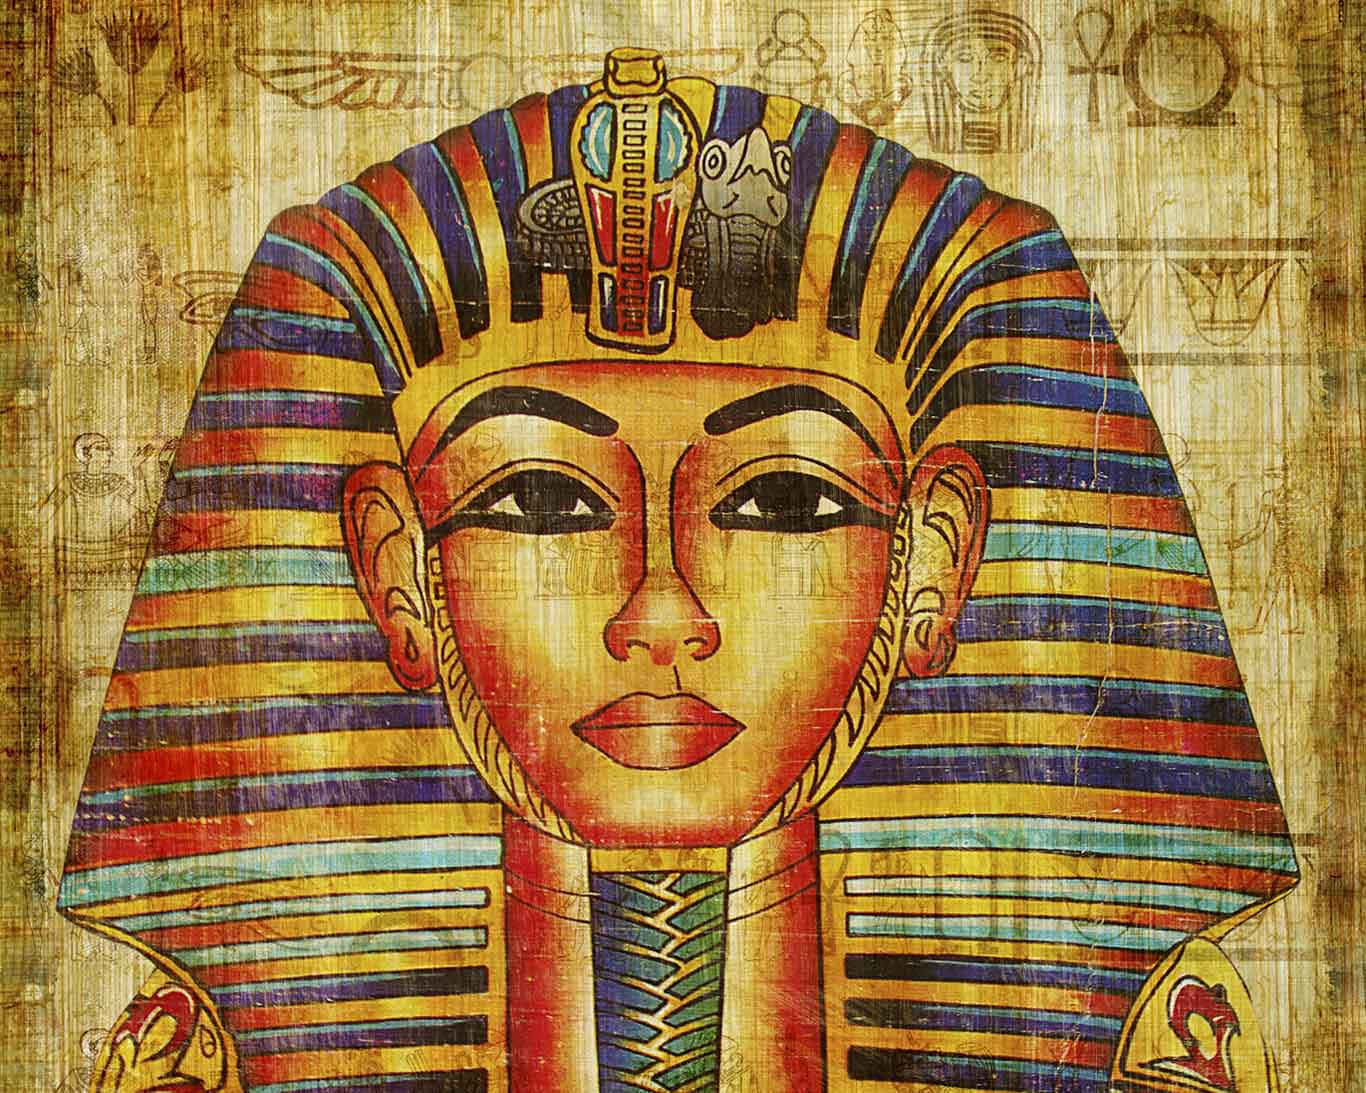 Cleopatra—ascended the throne of ancient Egypt at the age of 18.